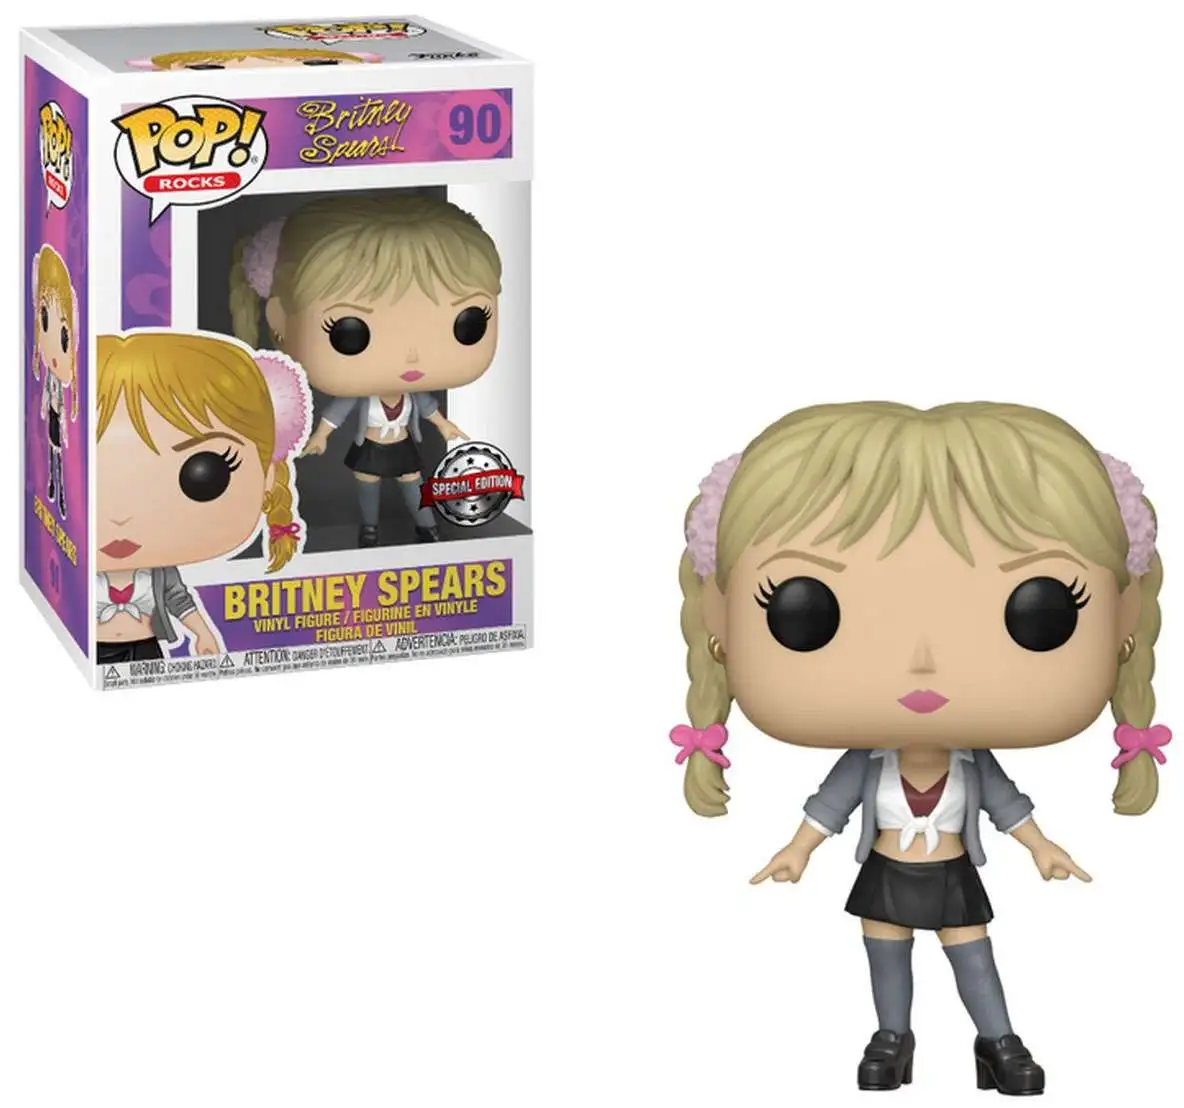 Britney Spears Exclusive Pop Vinyl Figure And Large T-Shirt NEW FUNKO POP 